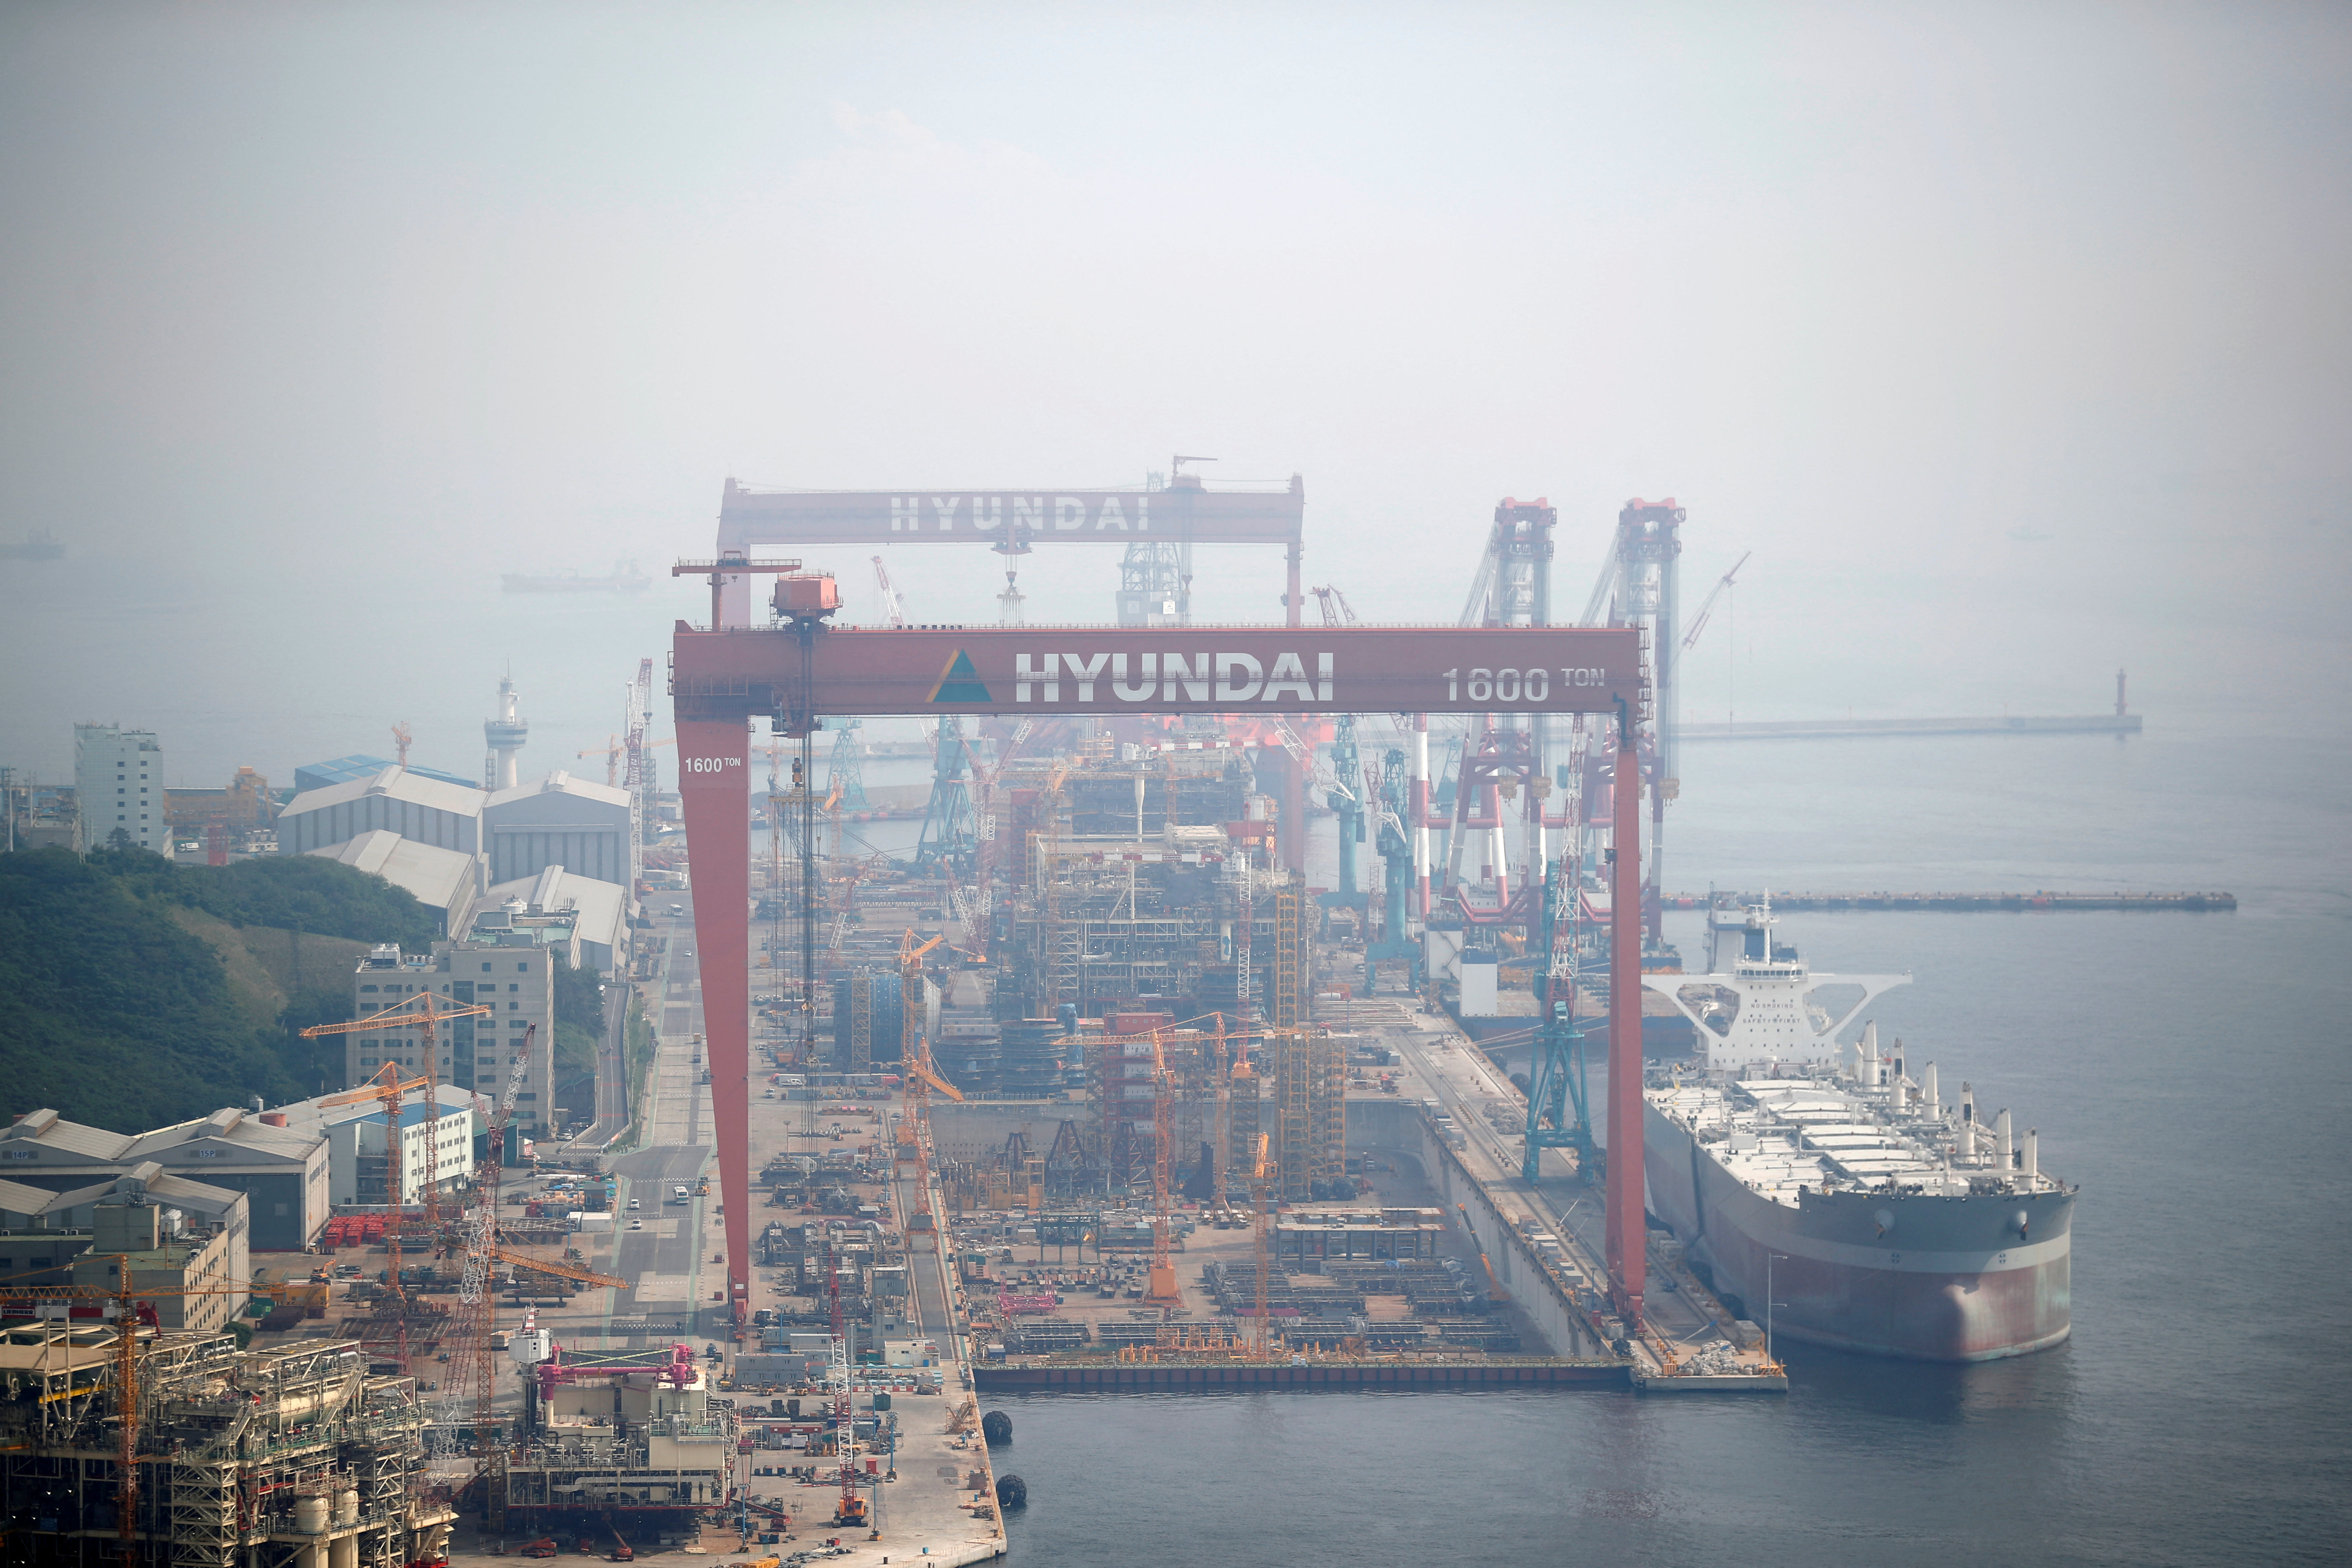 Giant cranes of Hyundai Heavy Industries are seen in Ulsan, South Korea, May 29, 2018. Picture taken on May 29, 2018.  REUTERS/Kim Hong-Ji